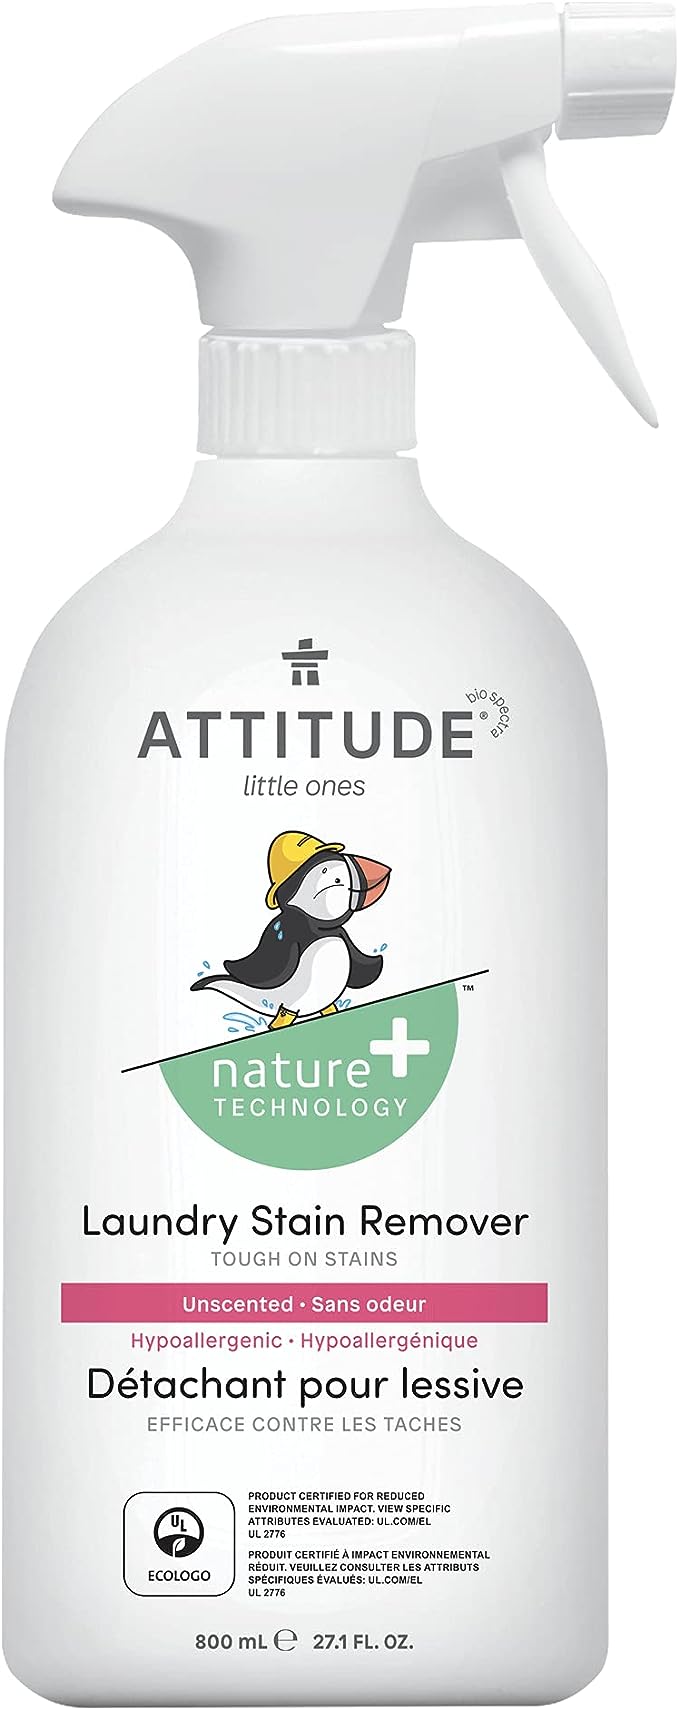 ATTITUDE Laundry Stain Remover Baby Clothes Plant Mineral-Based Ingredients Vegan Cruelty-free Household Products Hypoallergenic Unscented 27 Fl Oz